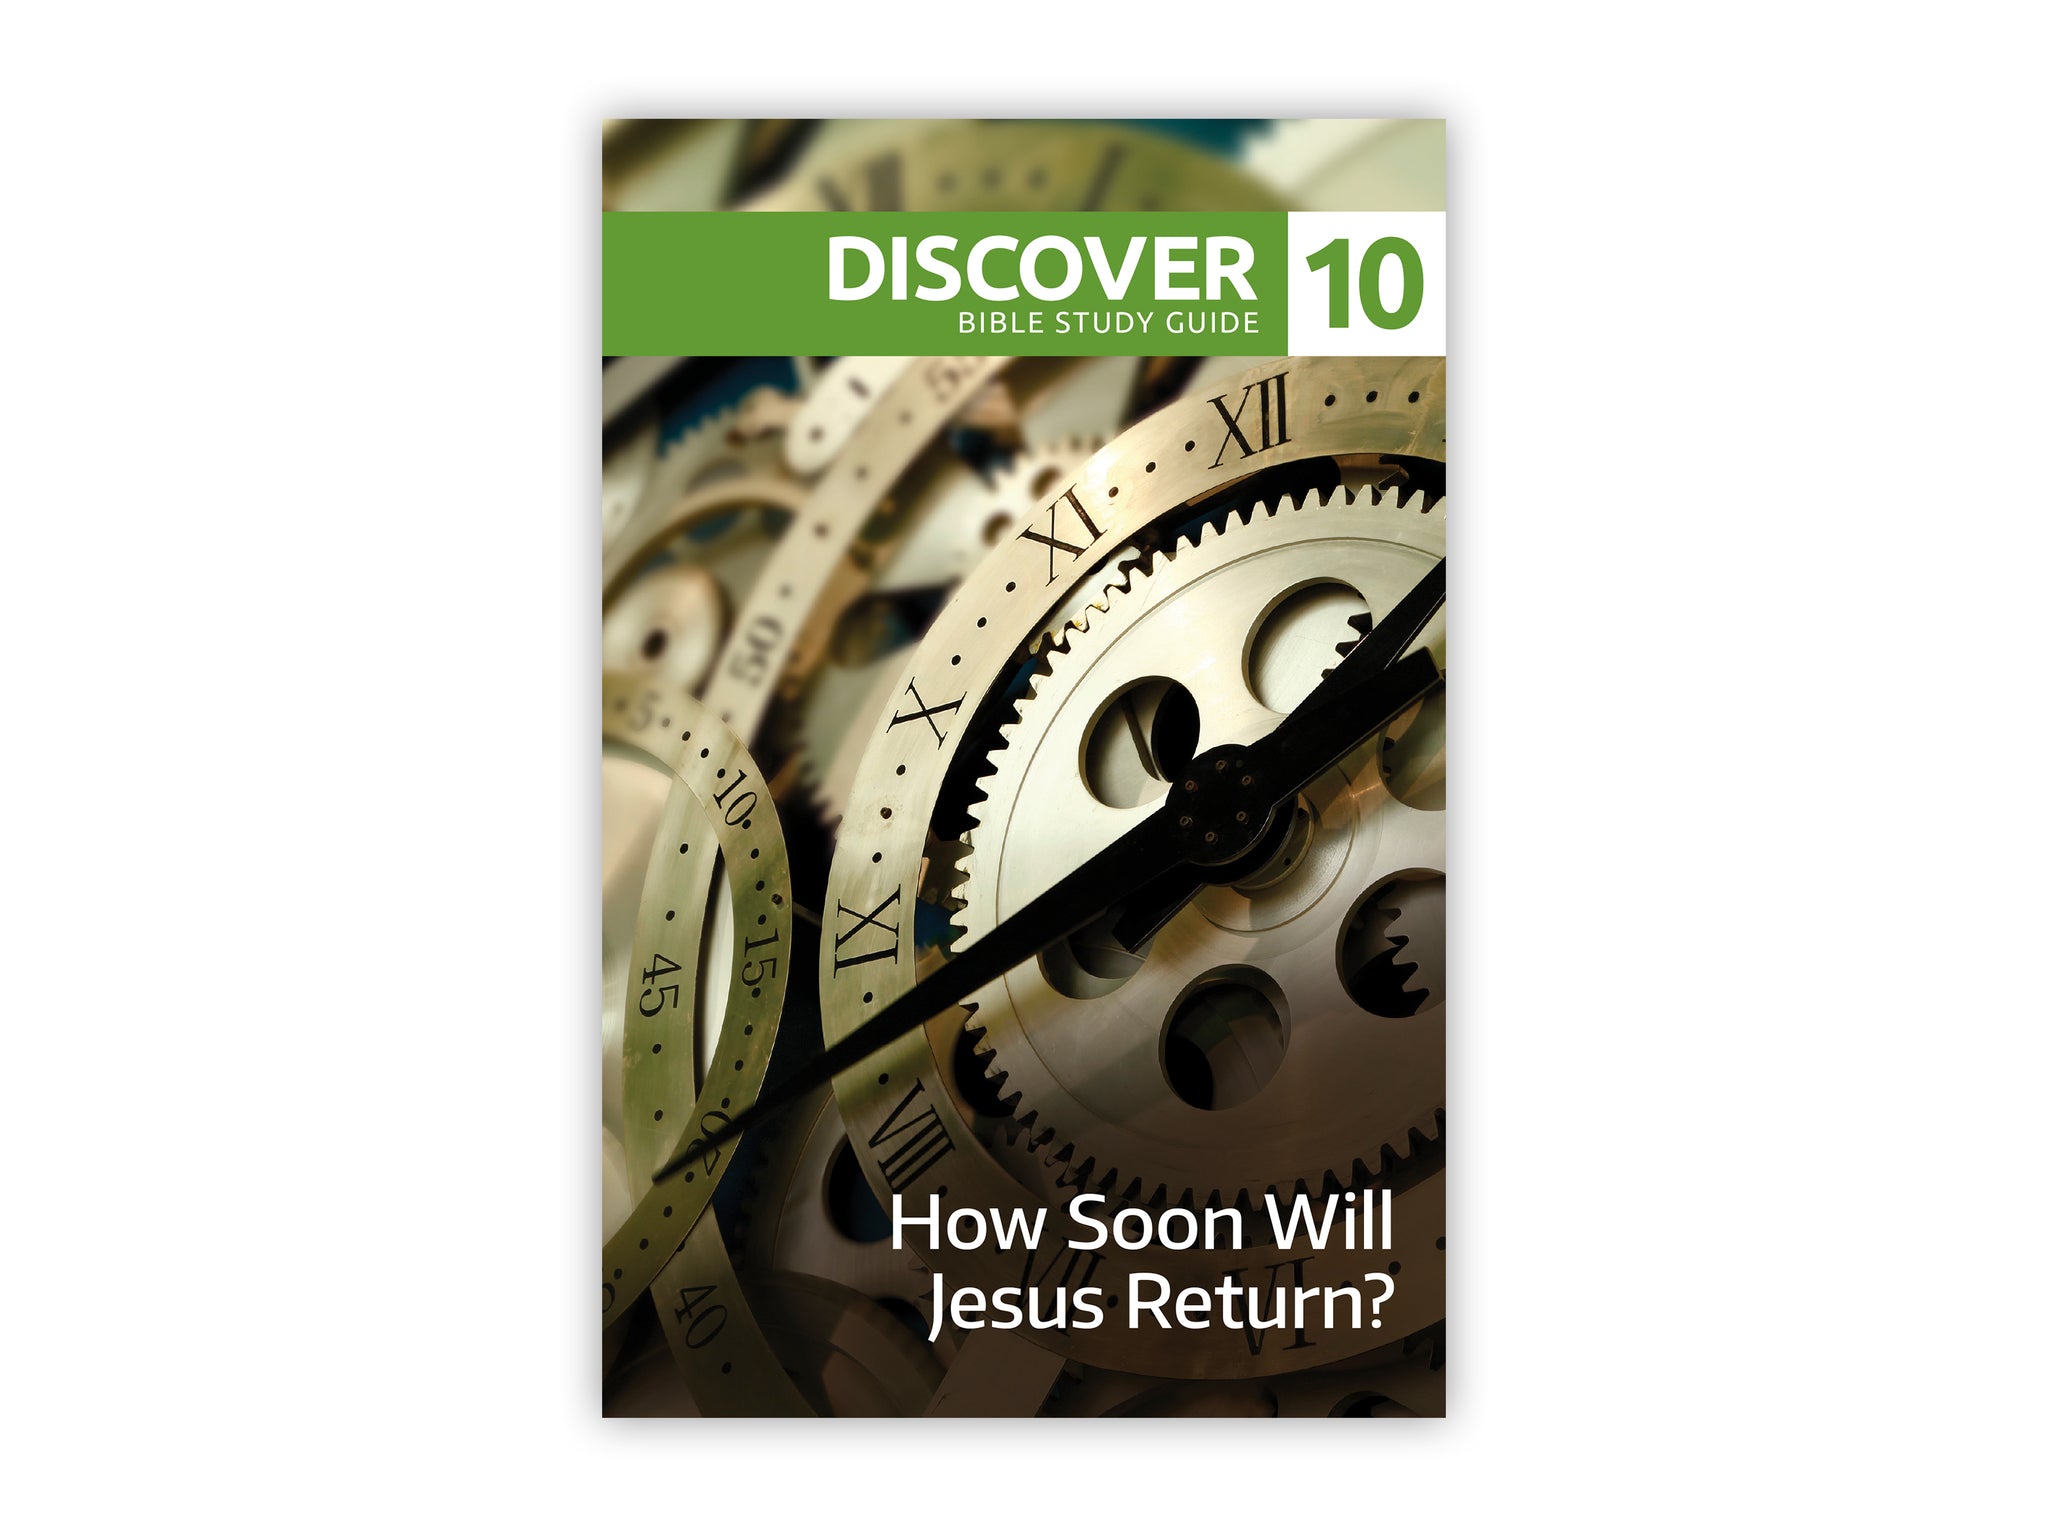 Discover Bible Study Guide #10 - How Soon Will Jesus Return?